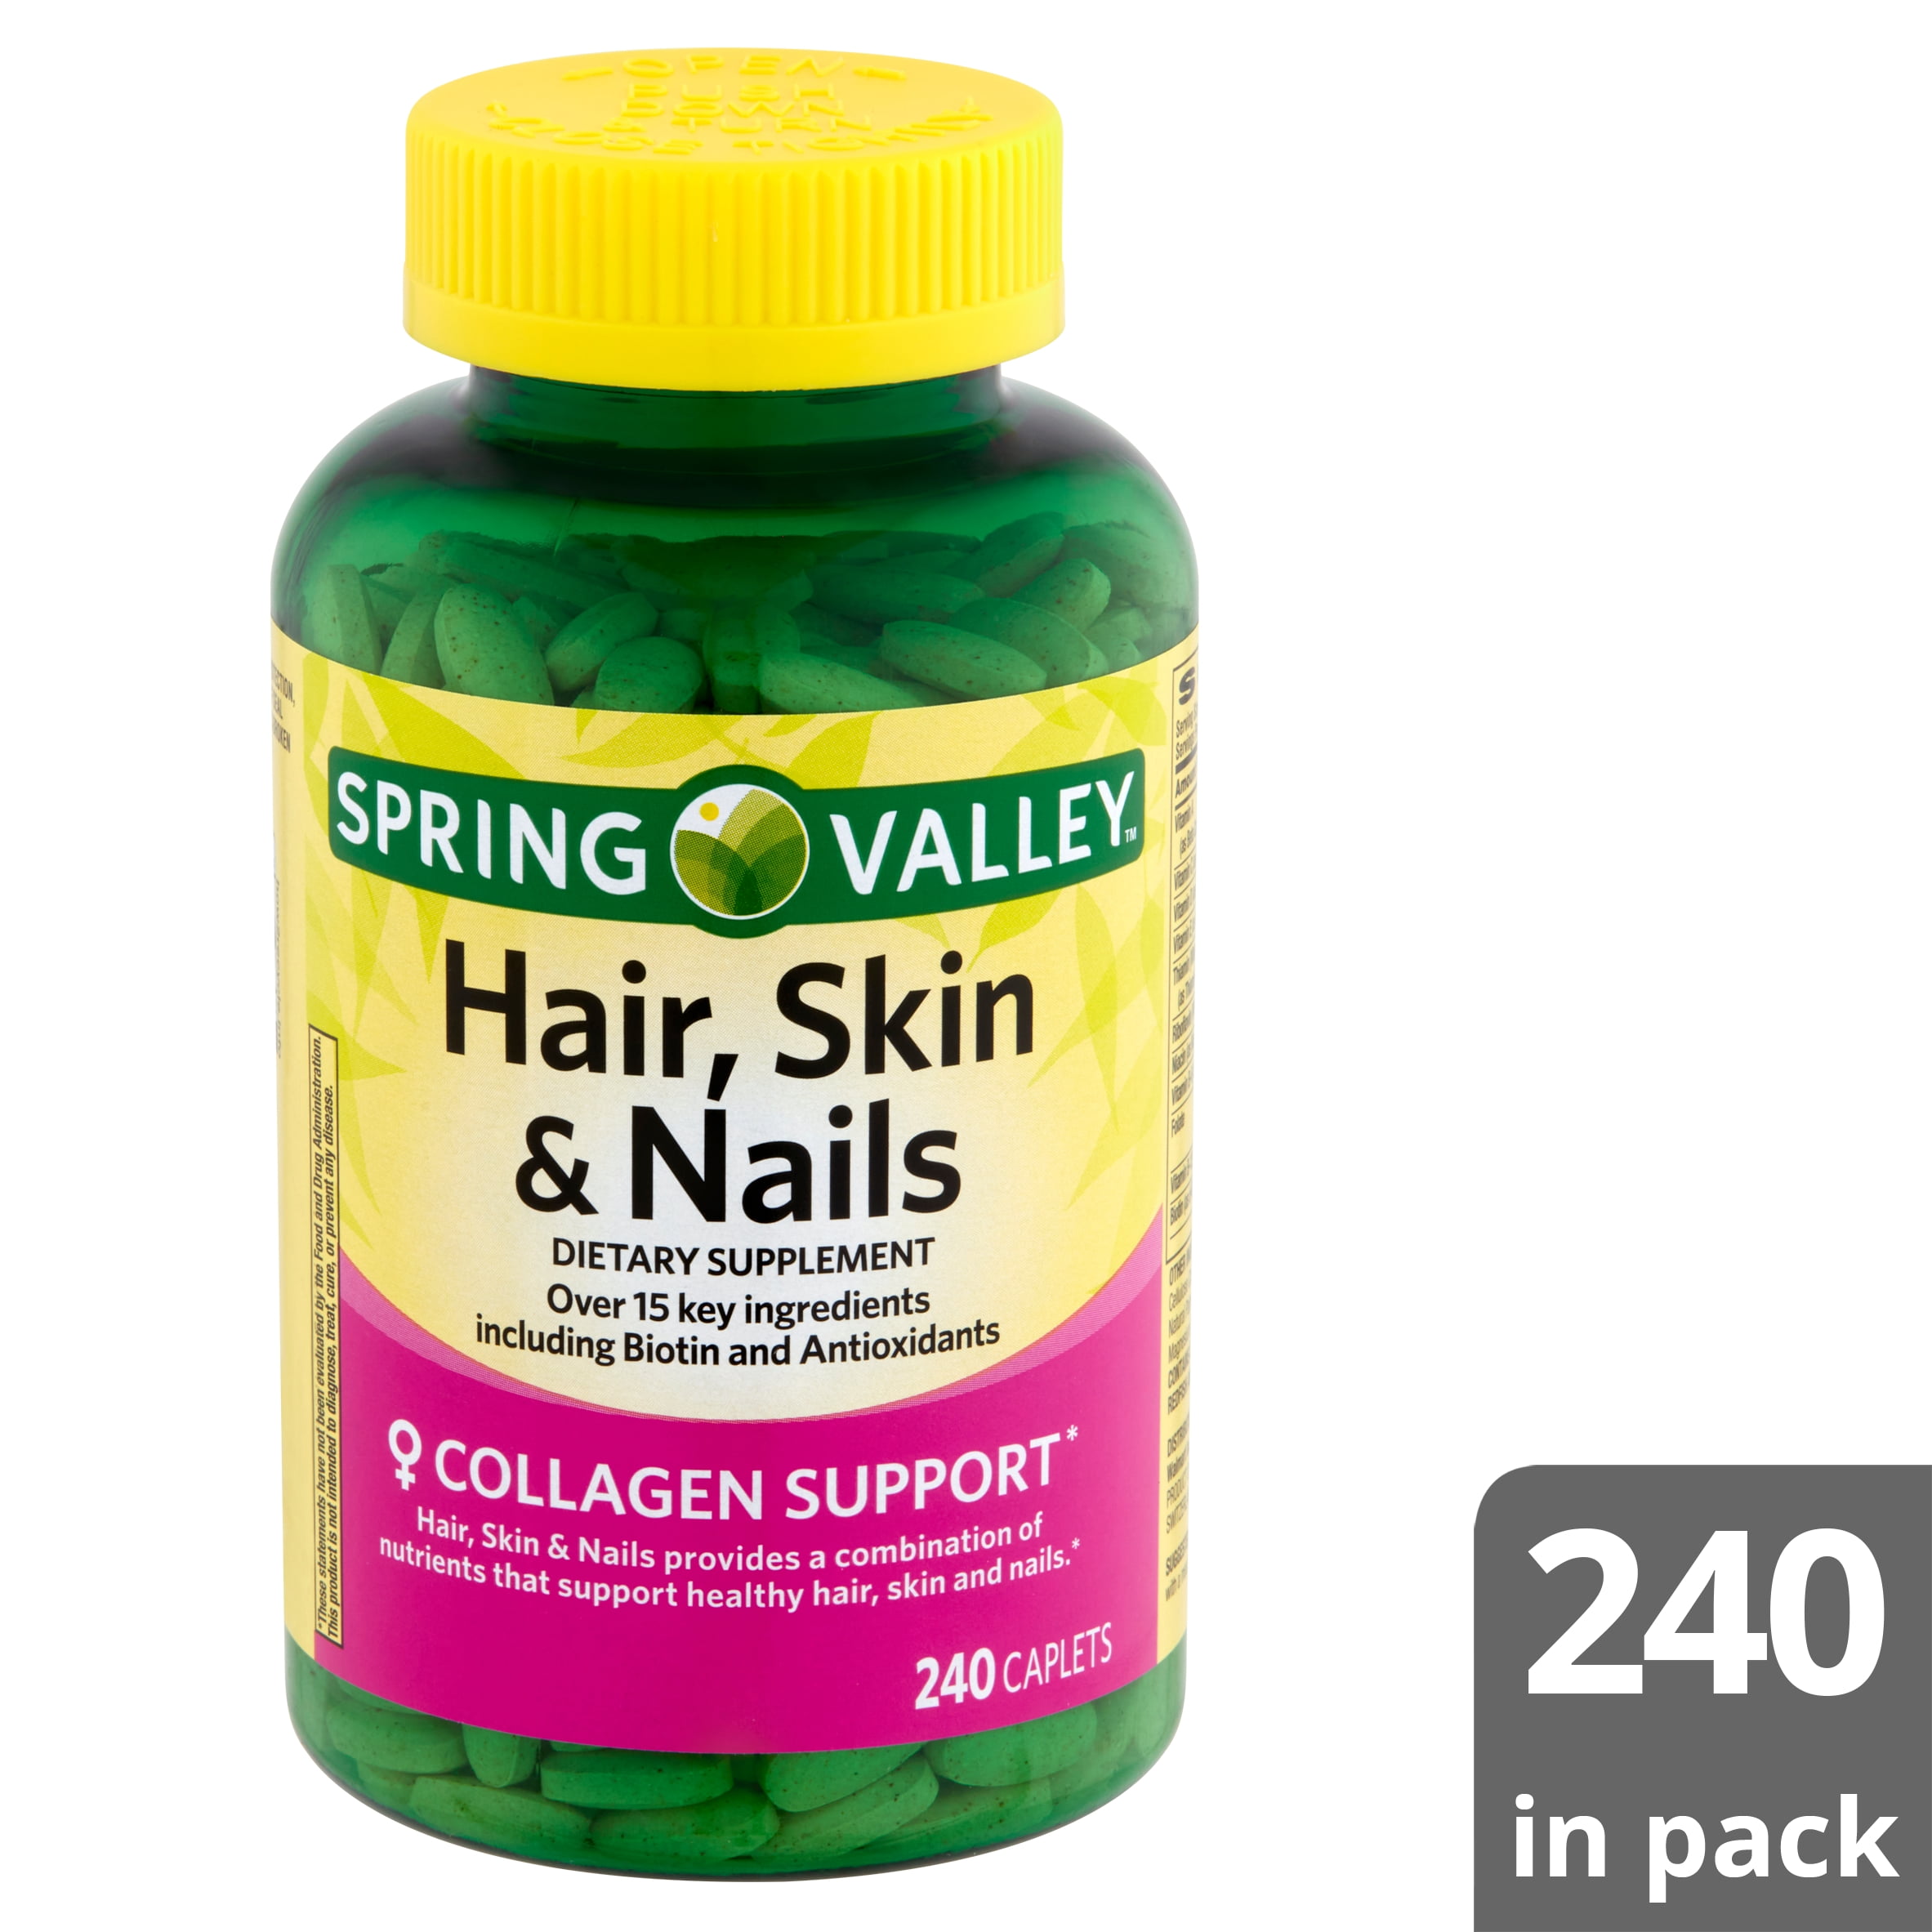 Spring Valley Hair, Skin & Nails Dietary Supplement, 240 count 